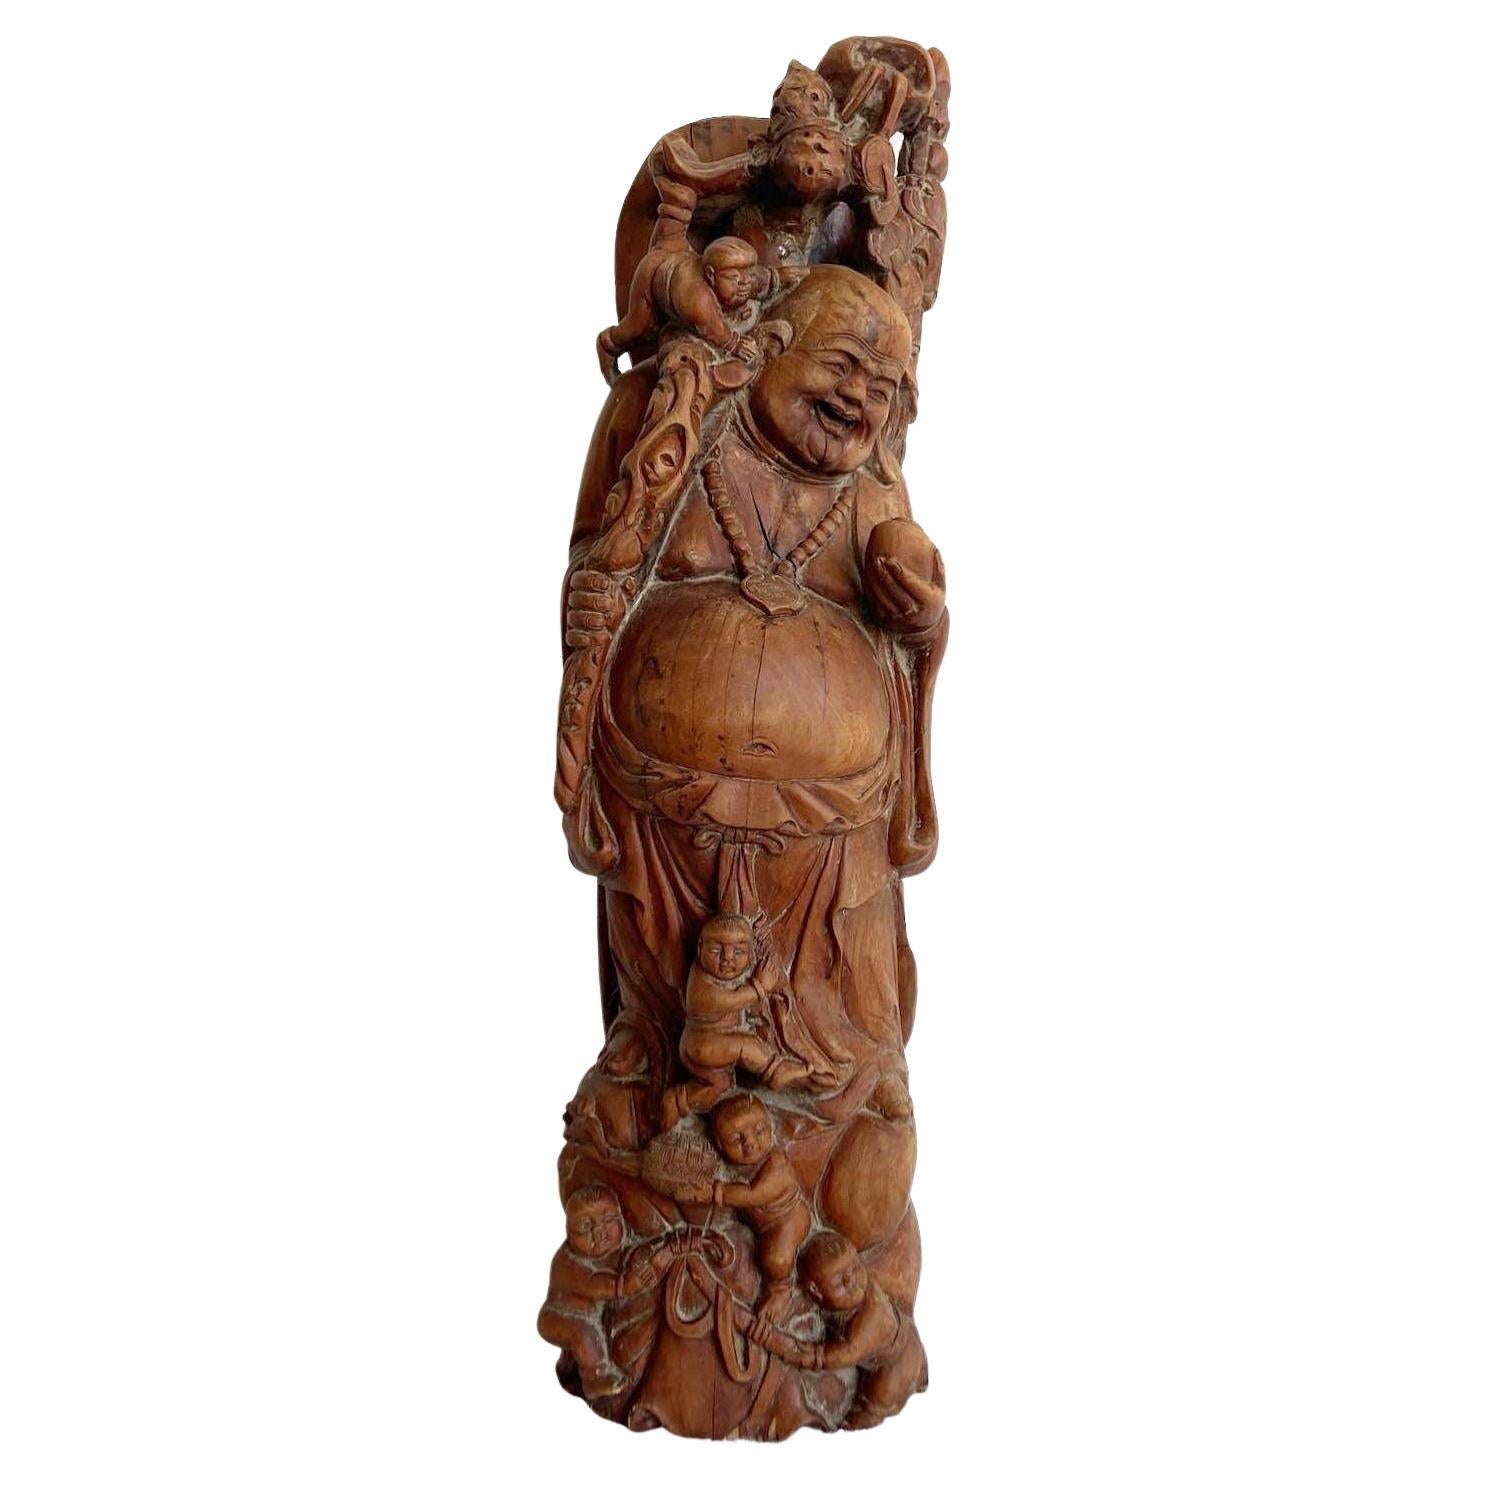 Vintage Chinese Wooden Buddha Sculpture For Sale